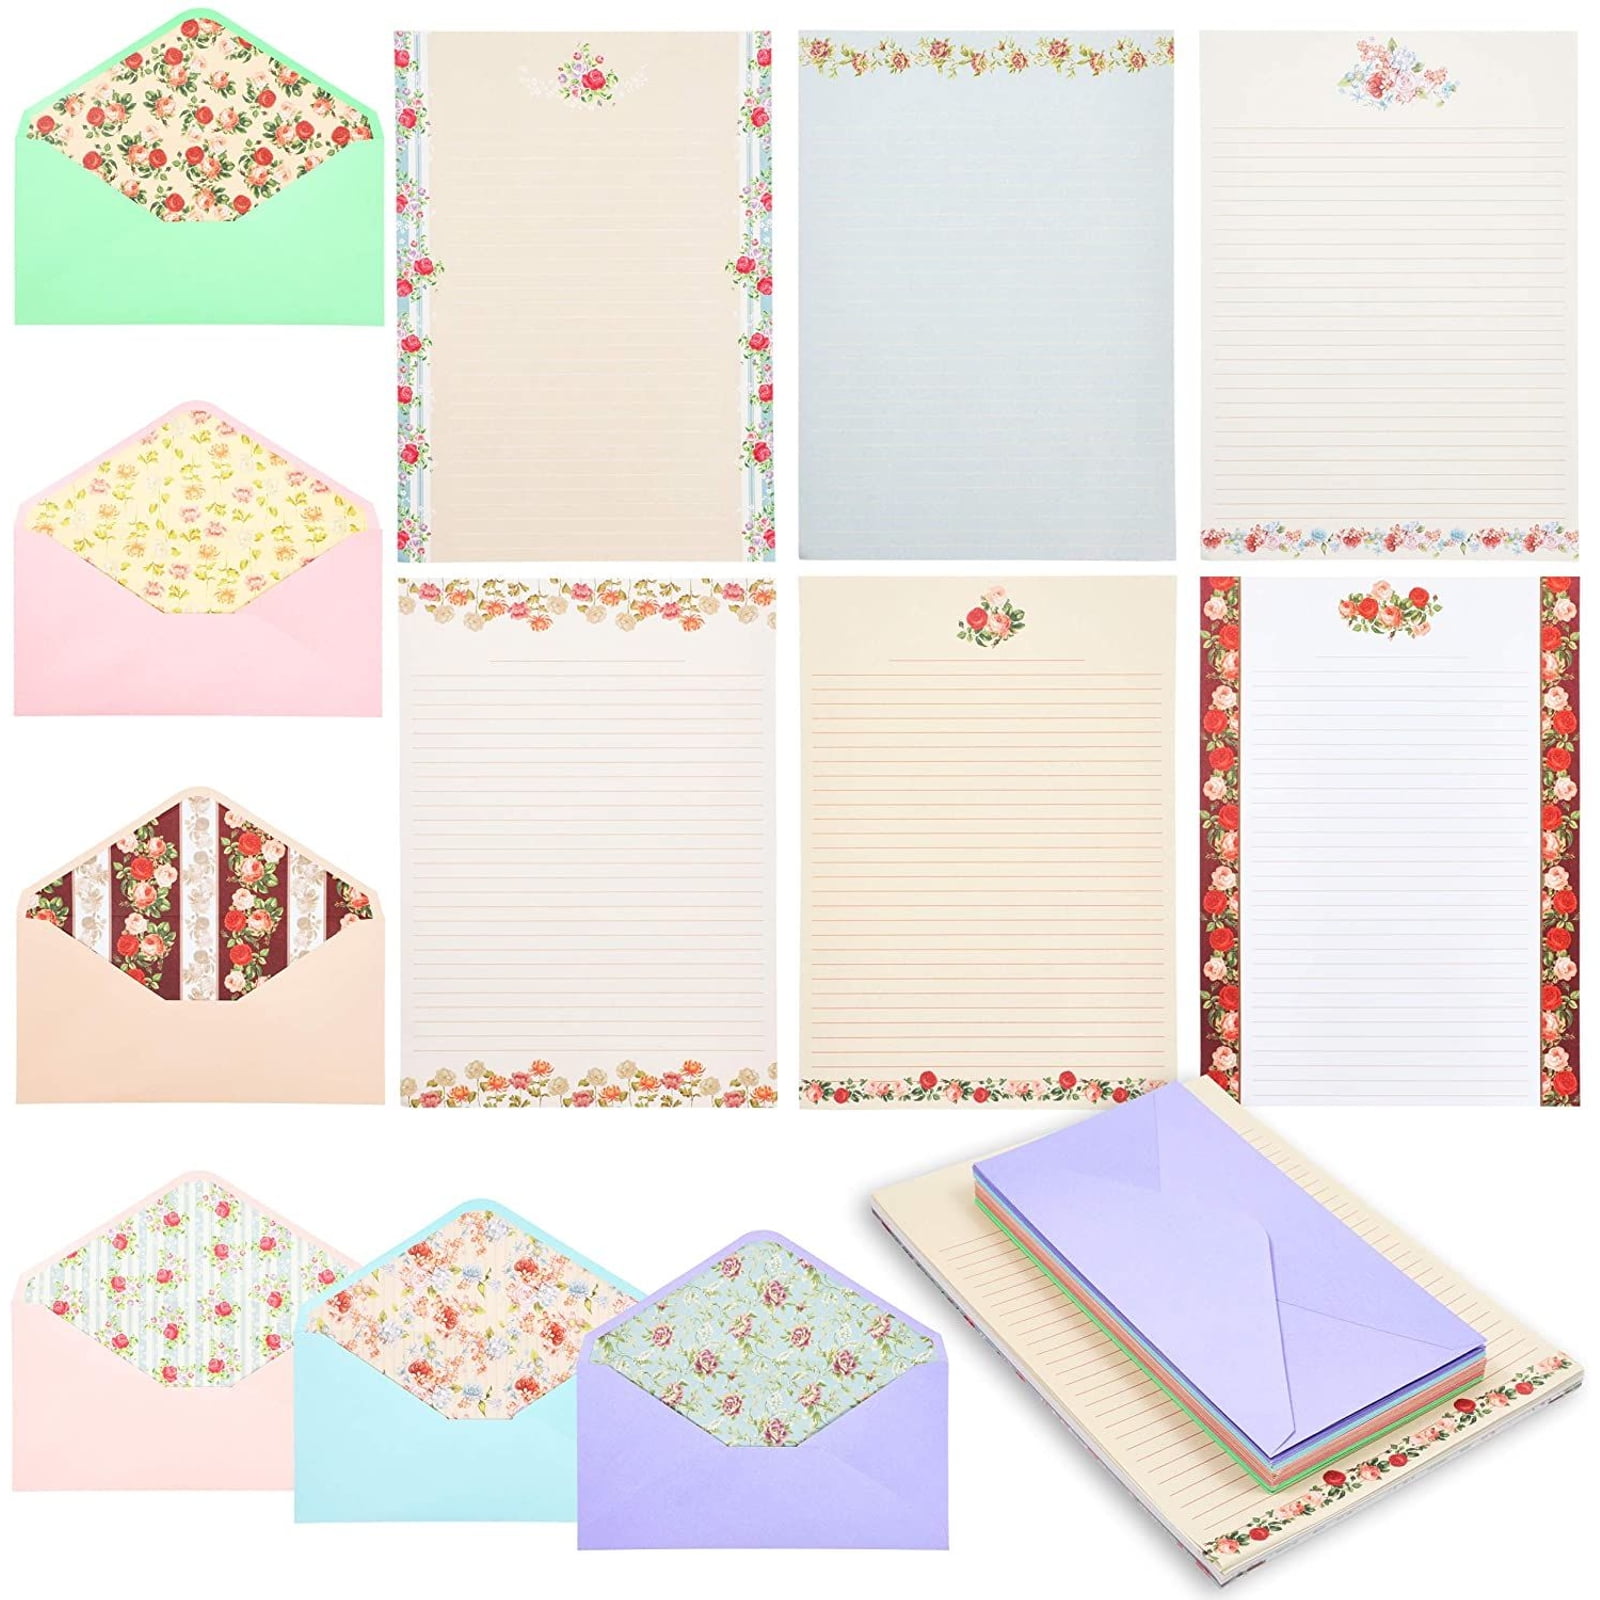 Stationary Paper and Envelopes Set60pcs Stationary Set40 Stationery Papers for sale online 